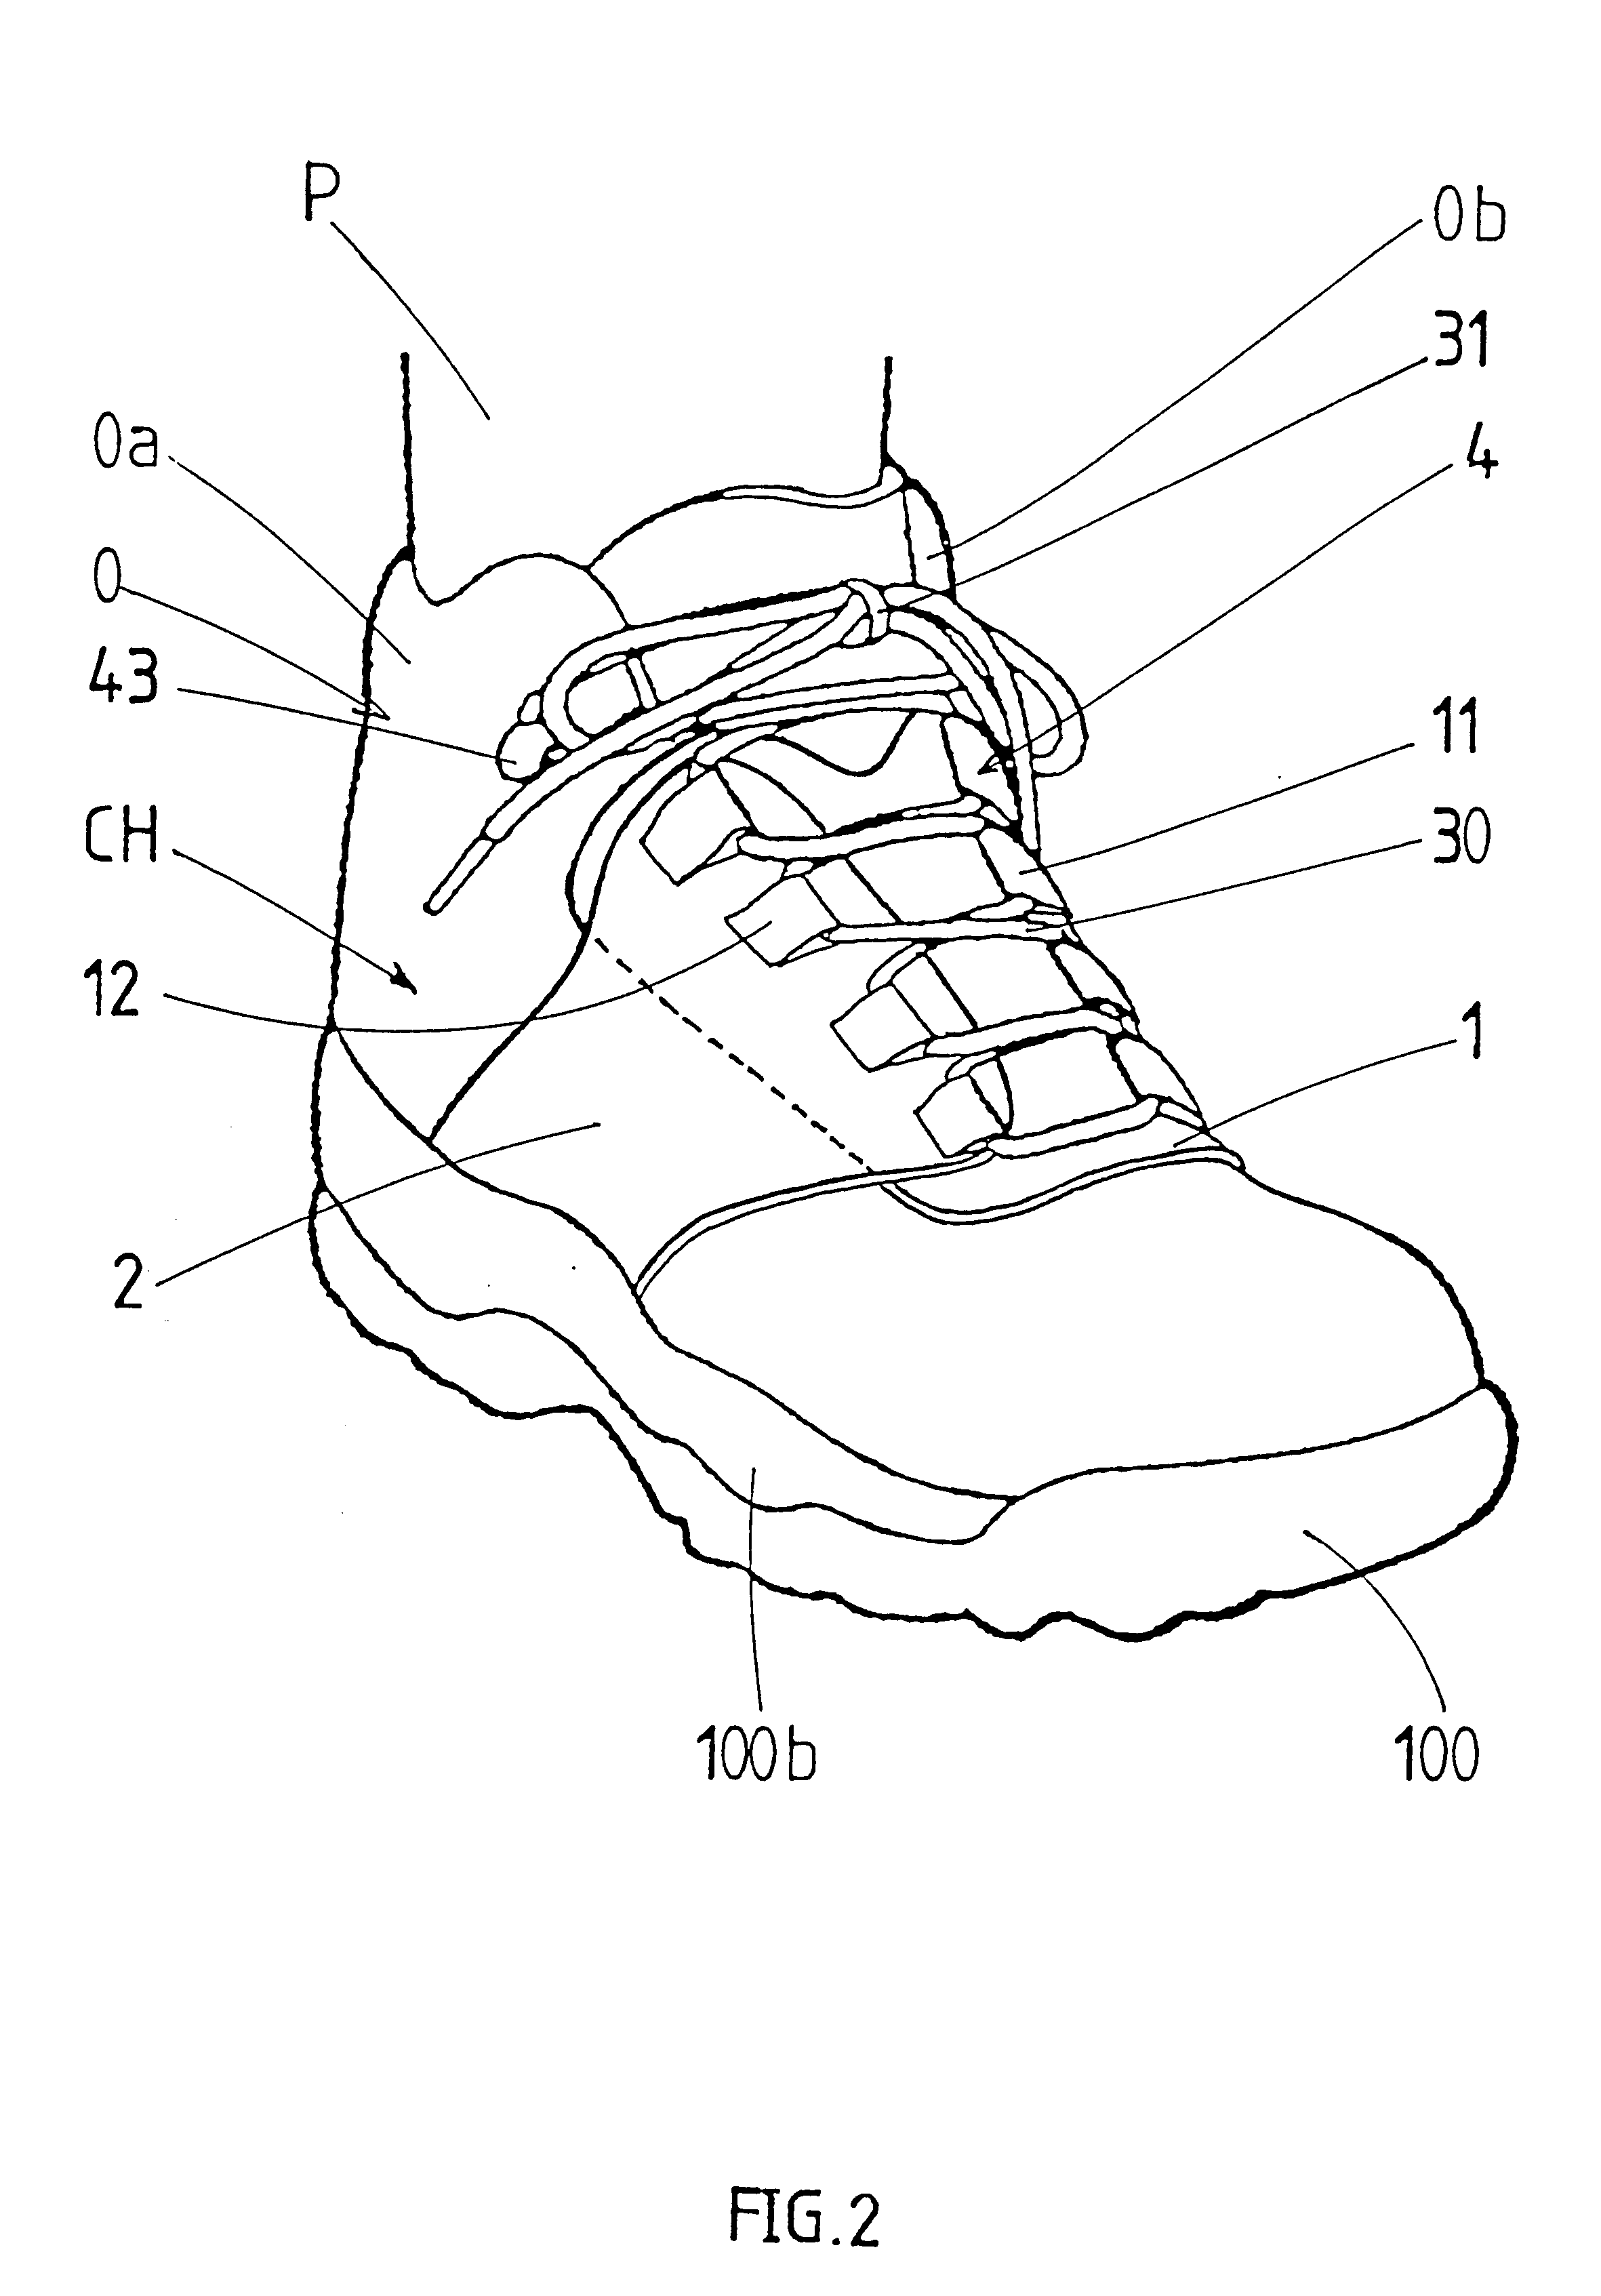 Tightening device for footwear, and an article of footwear incorporating such tightening device